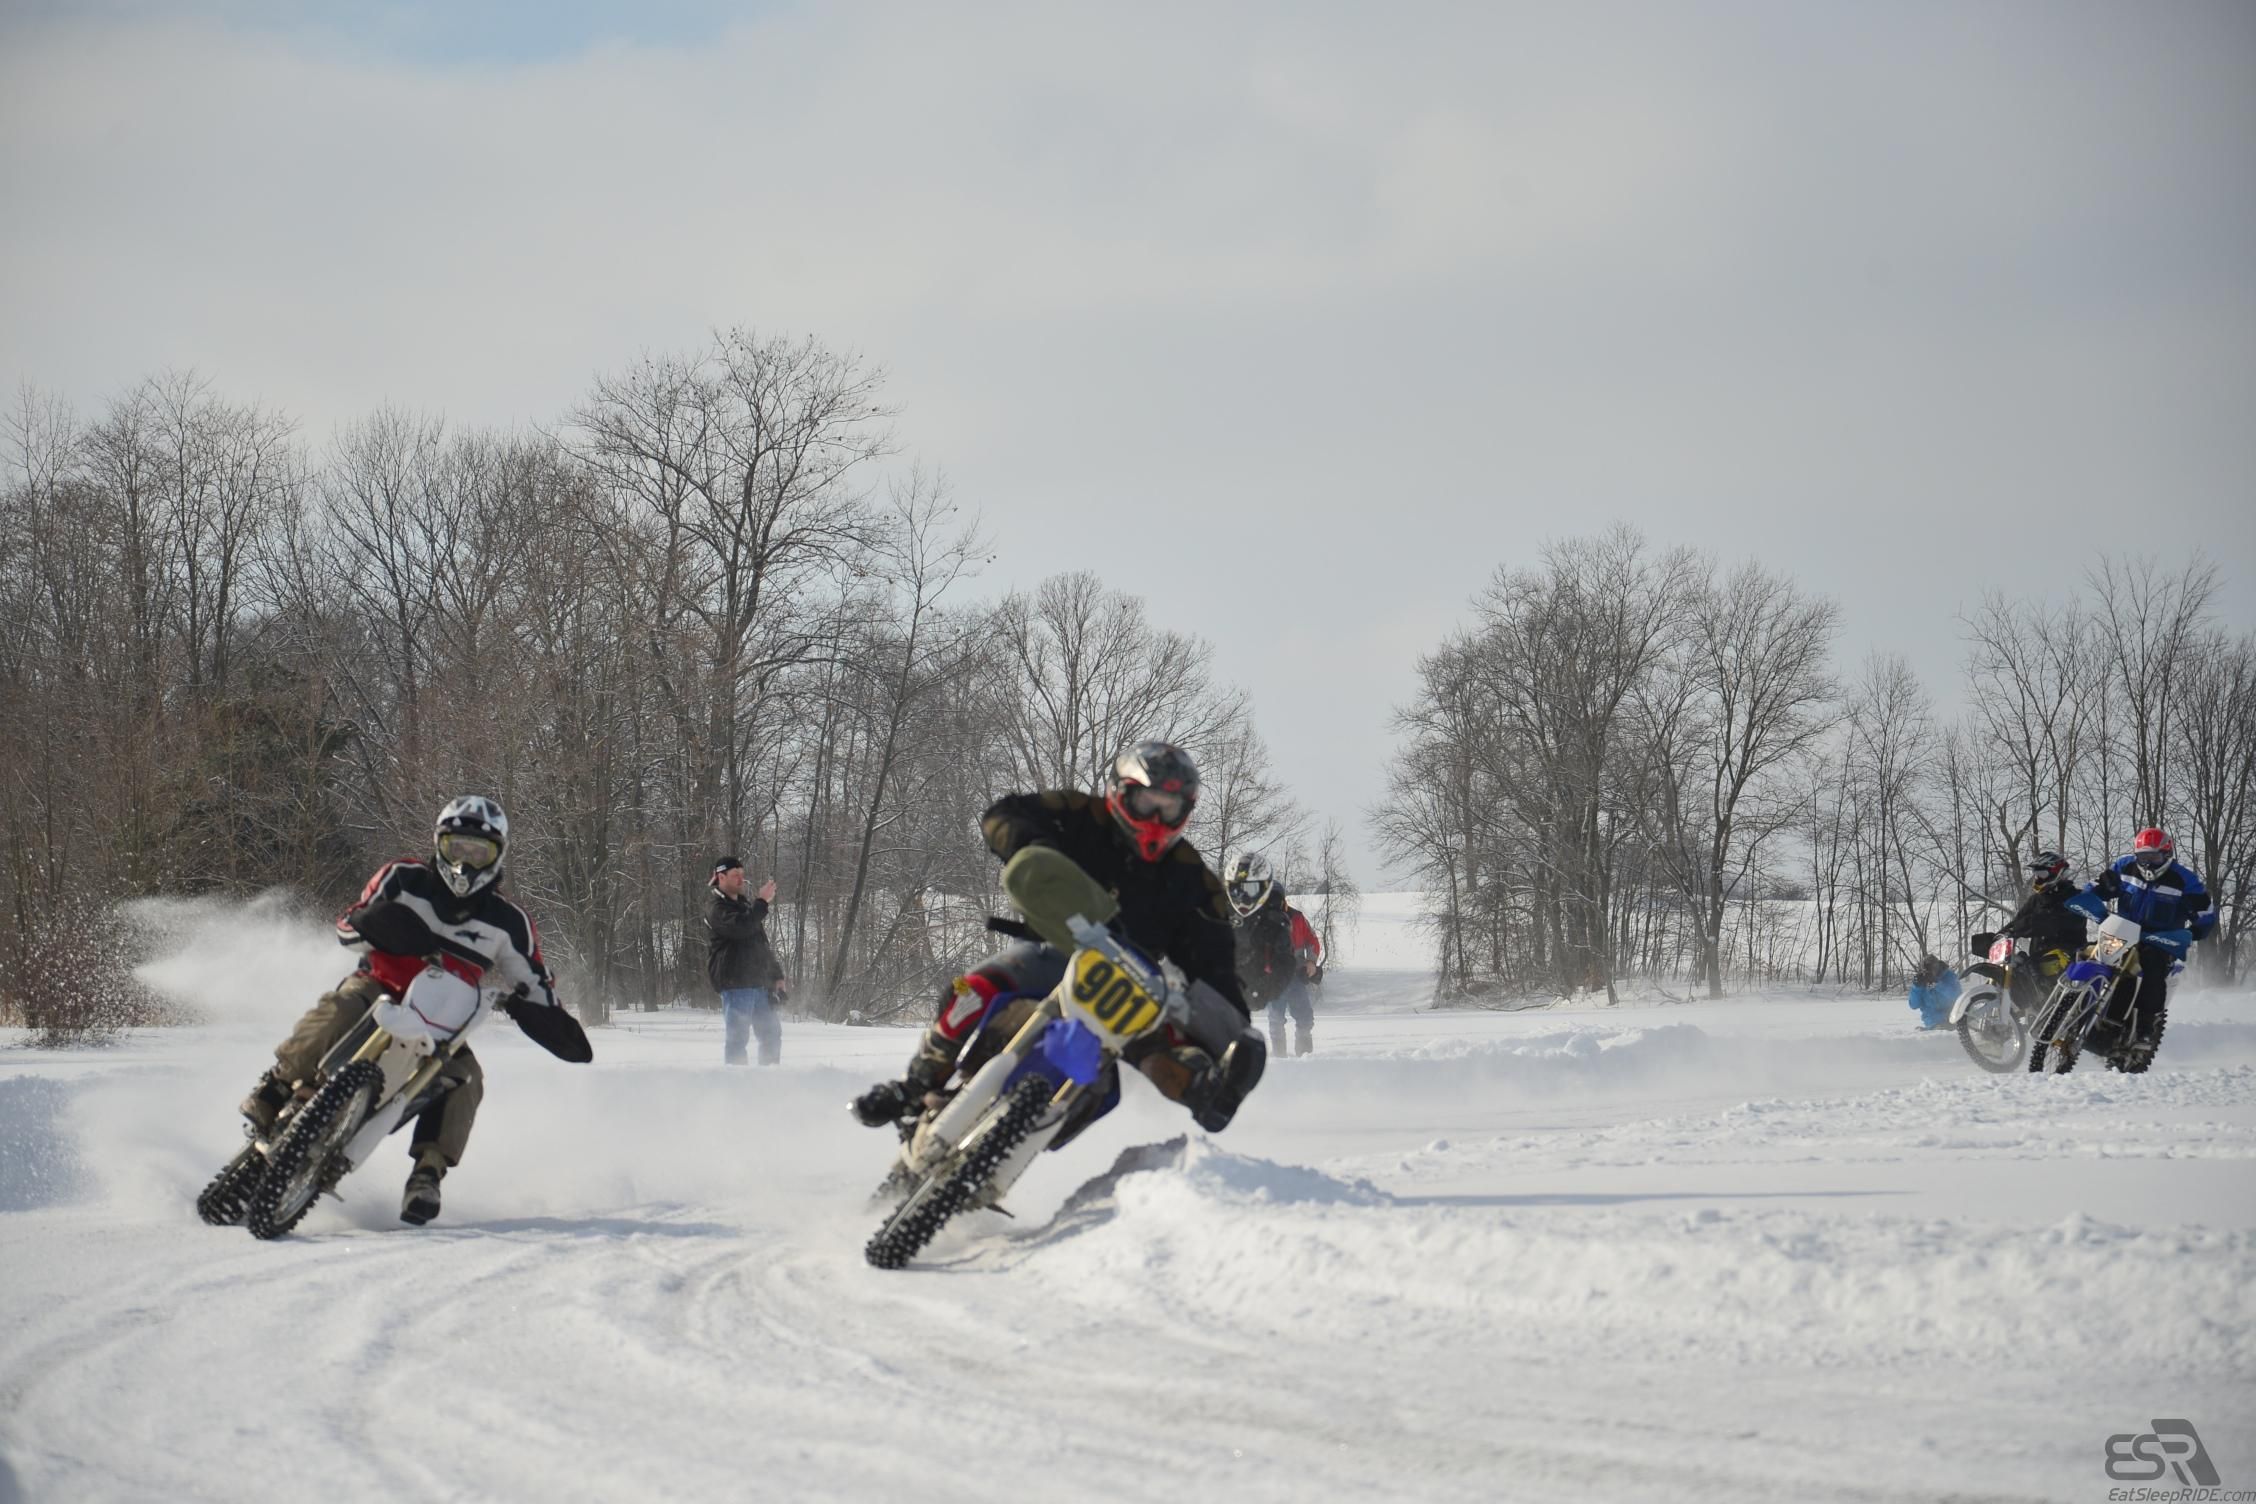 #901 and YZ250F - Ice riding